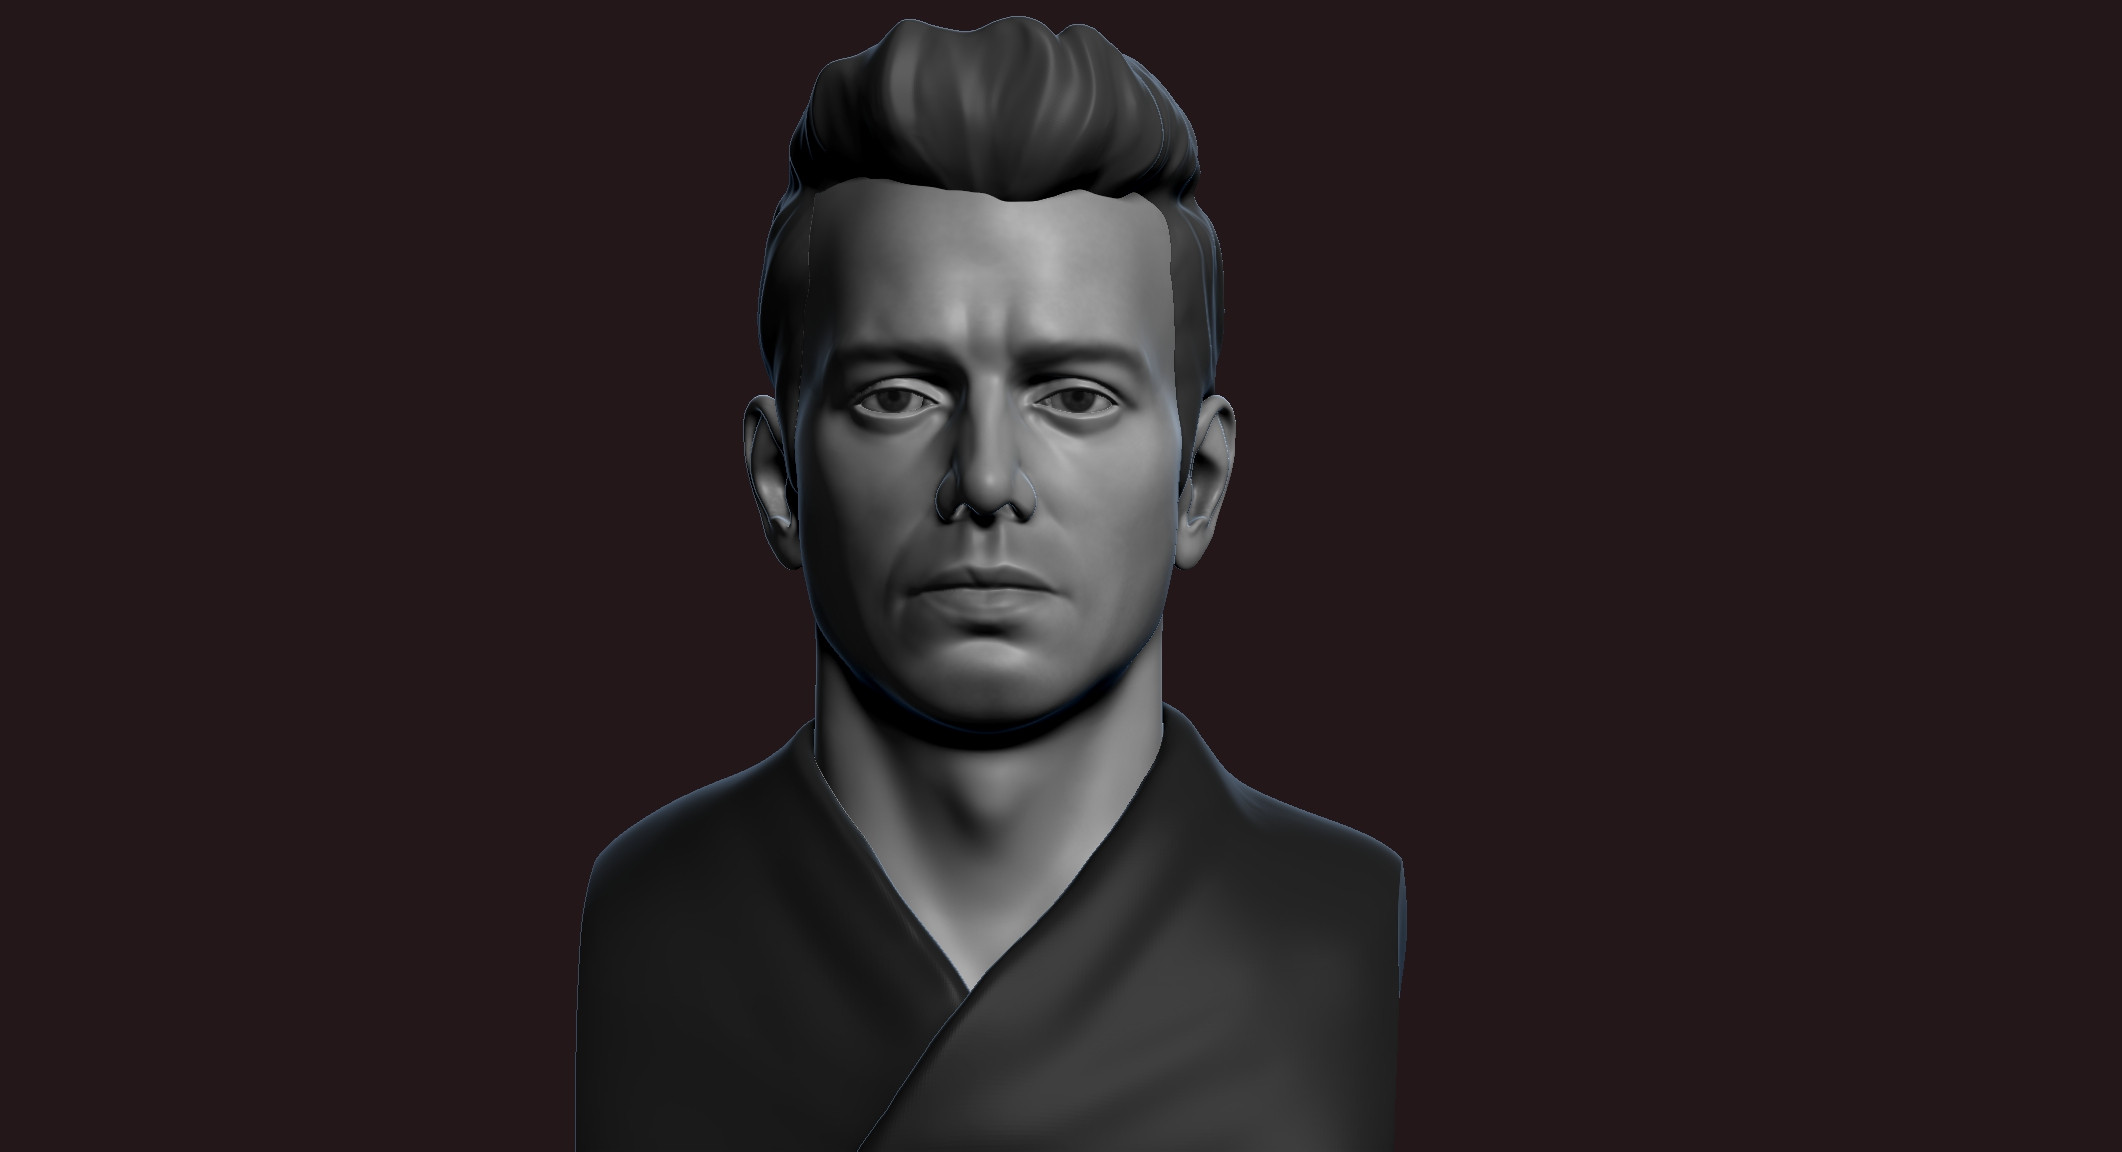 First Blockout, serves as a way of seeing the volumes, if you can capture the likeness at this stage means that the project is going in the right direction :)